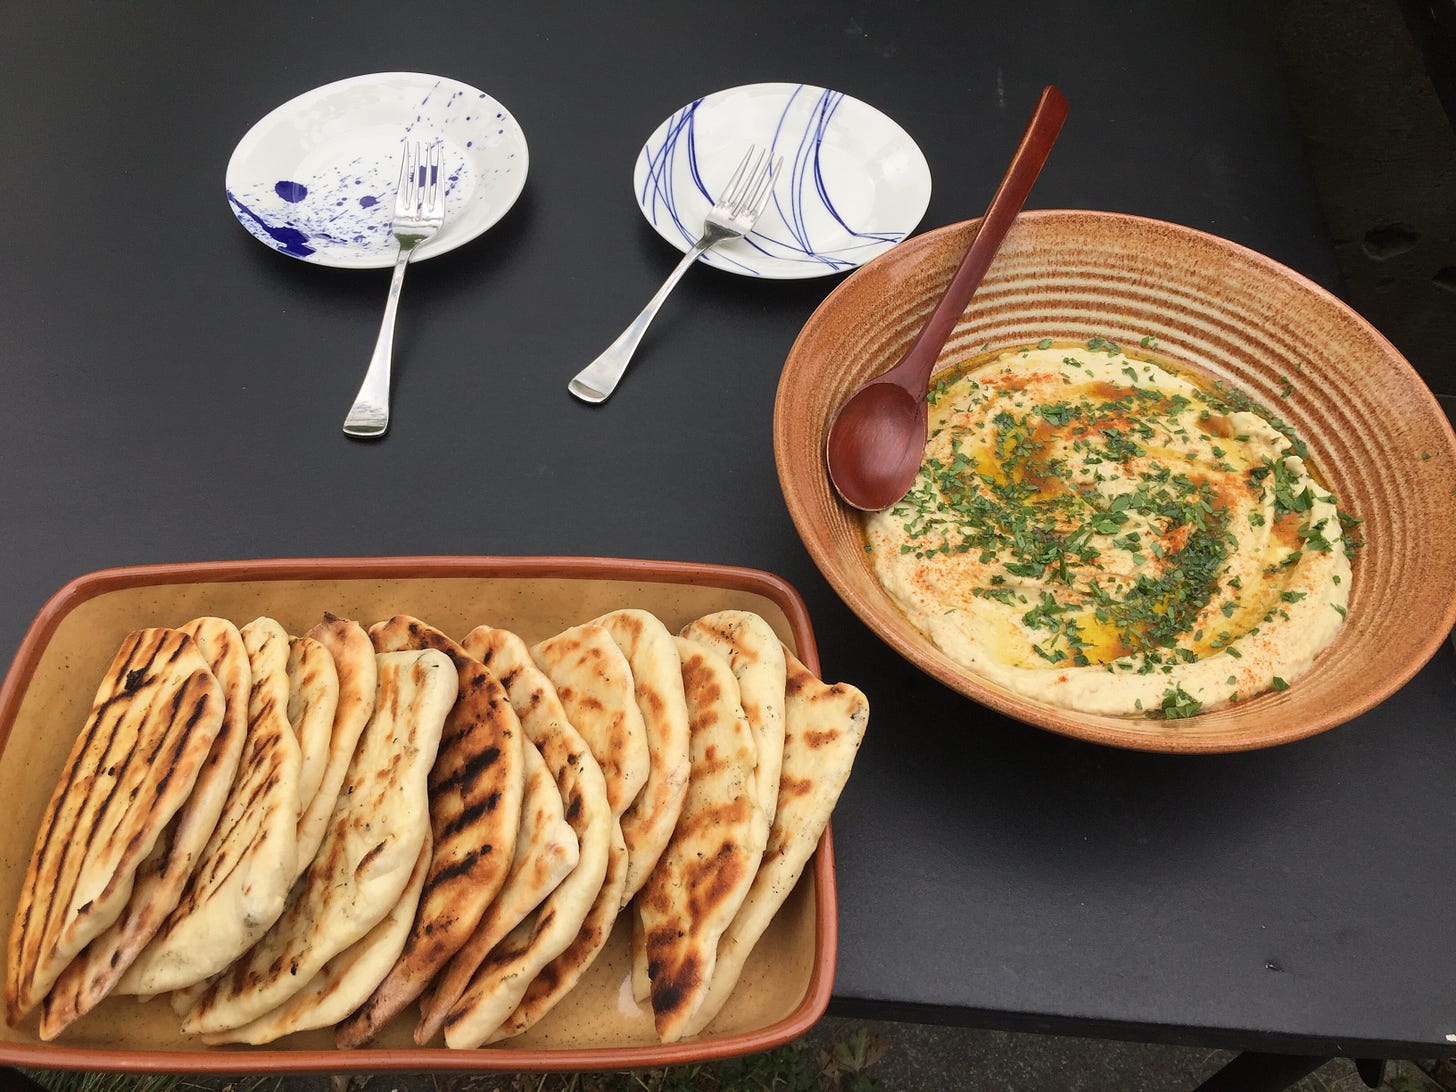 on a black table, a dish of baba ganoush sprinkled with parsley, mint, and smoked paprika, with a swirl of olive oil. Next to it is a rectangular dish full of half-moon shaped slices of grilled pita. Behind them are two small white plates with forks resting on them.